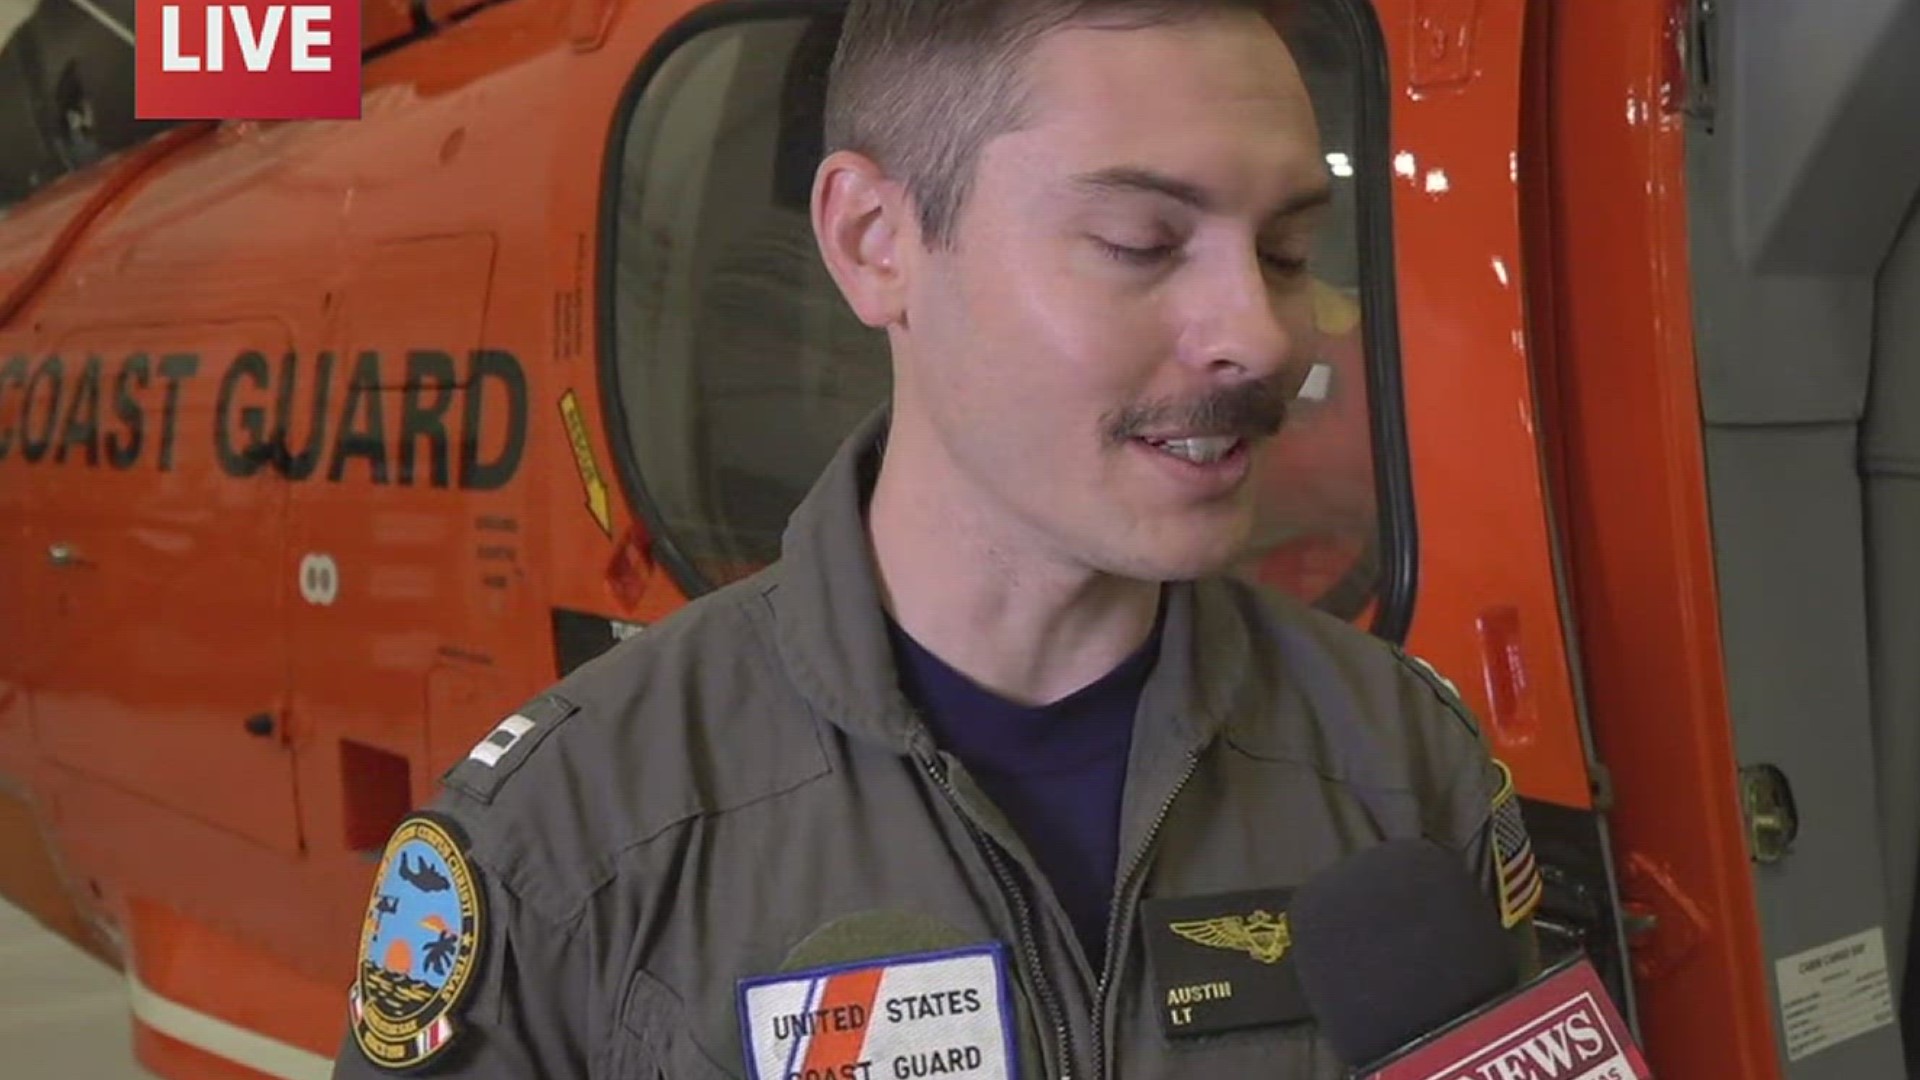 Meet Lt. Austin Ross, one of the pilots behind those bright orange Coast Guard search and Rescue helicopters! He shares more on what to expect this Saturday.